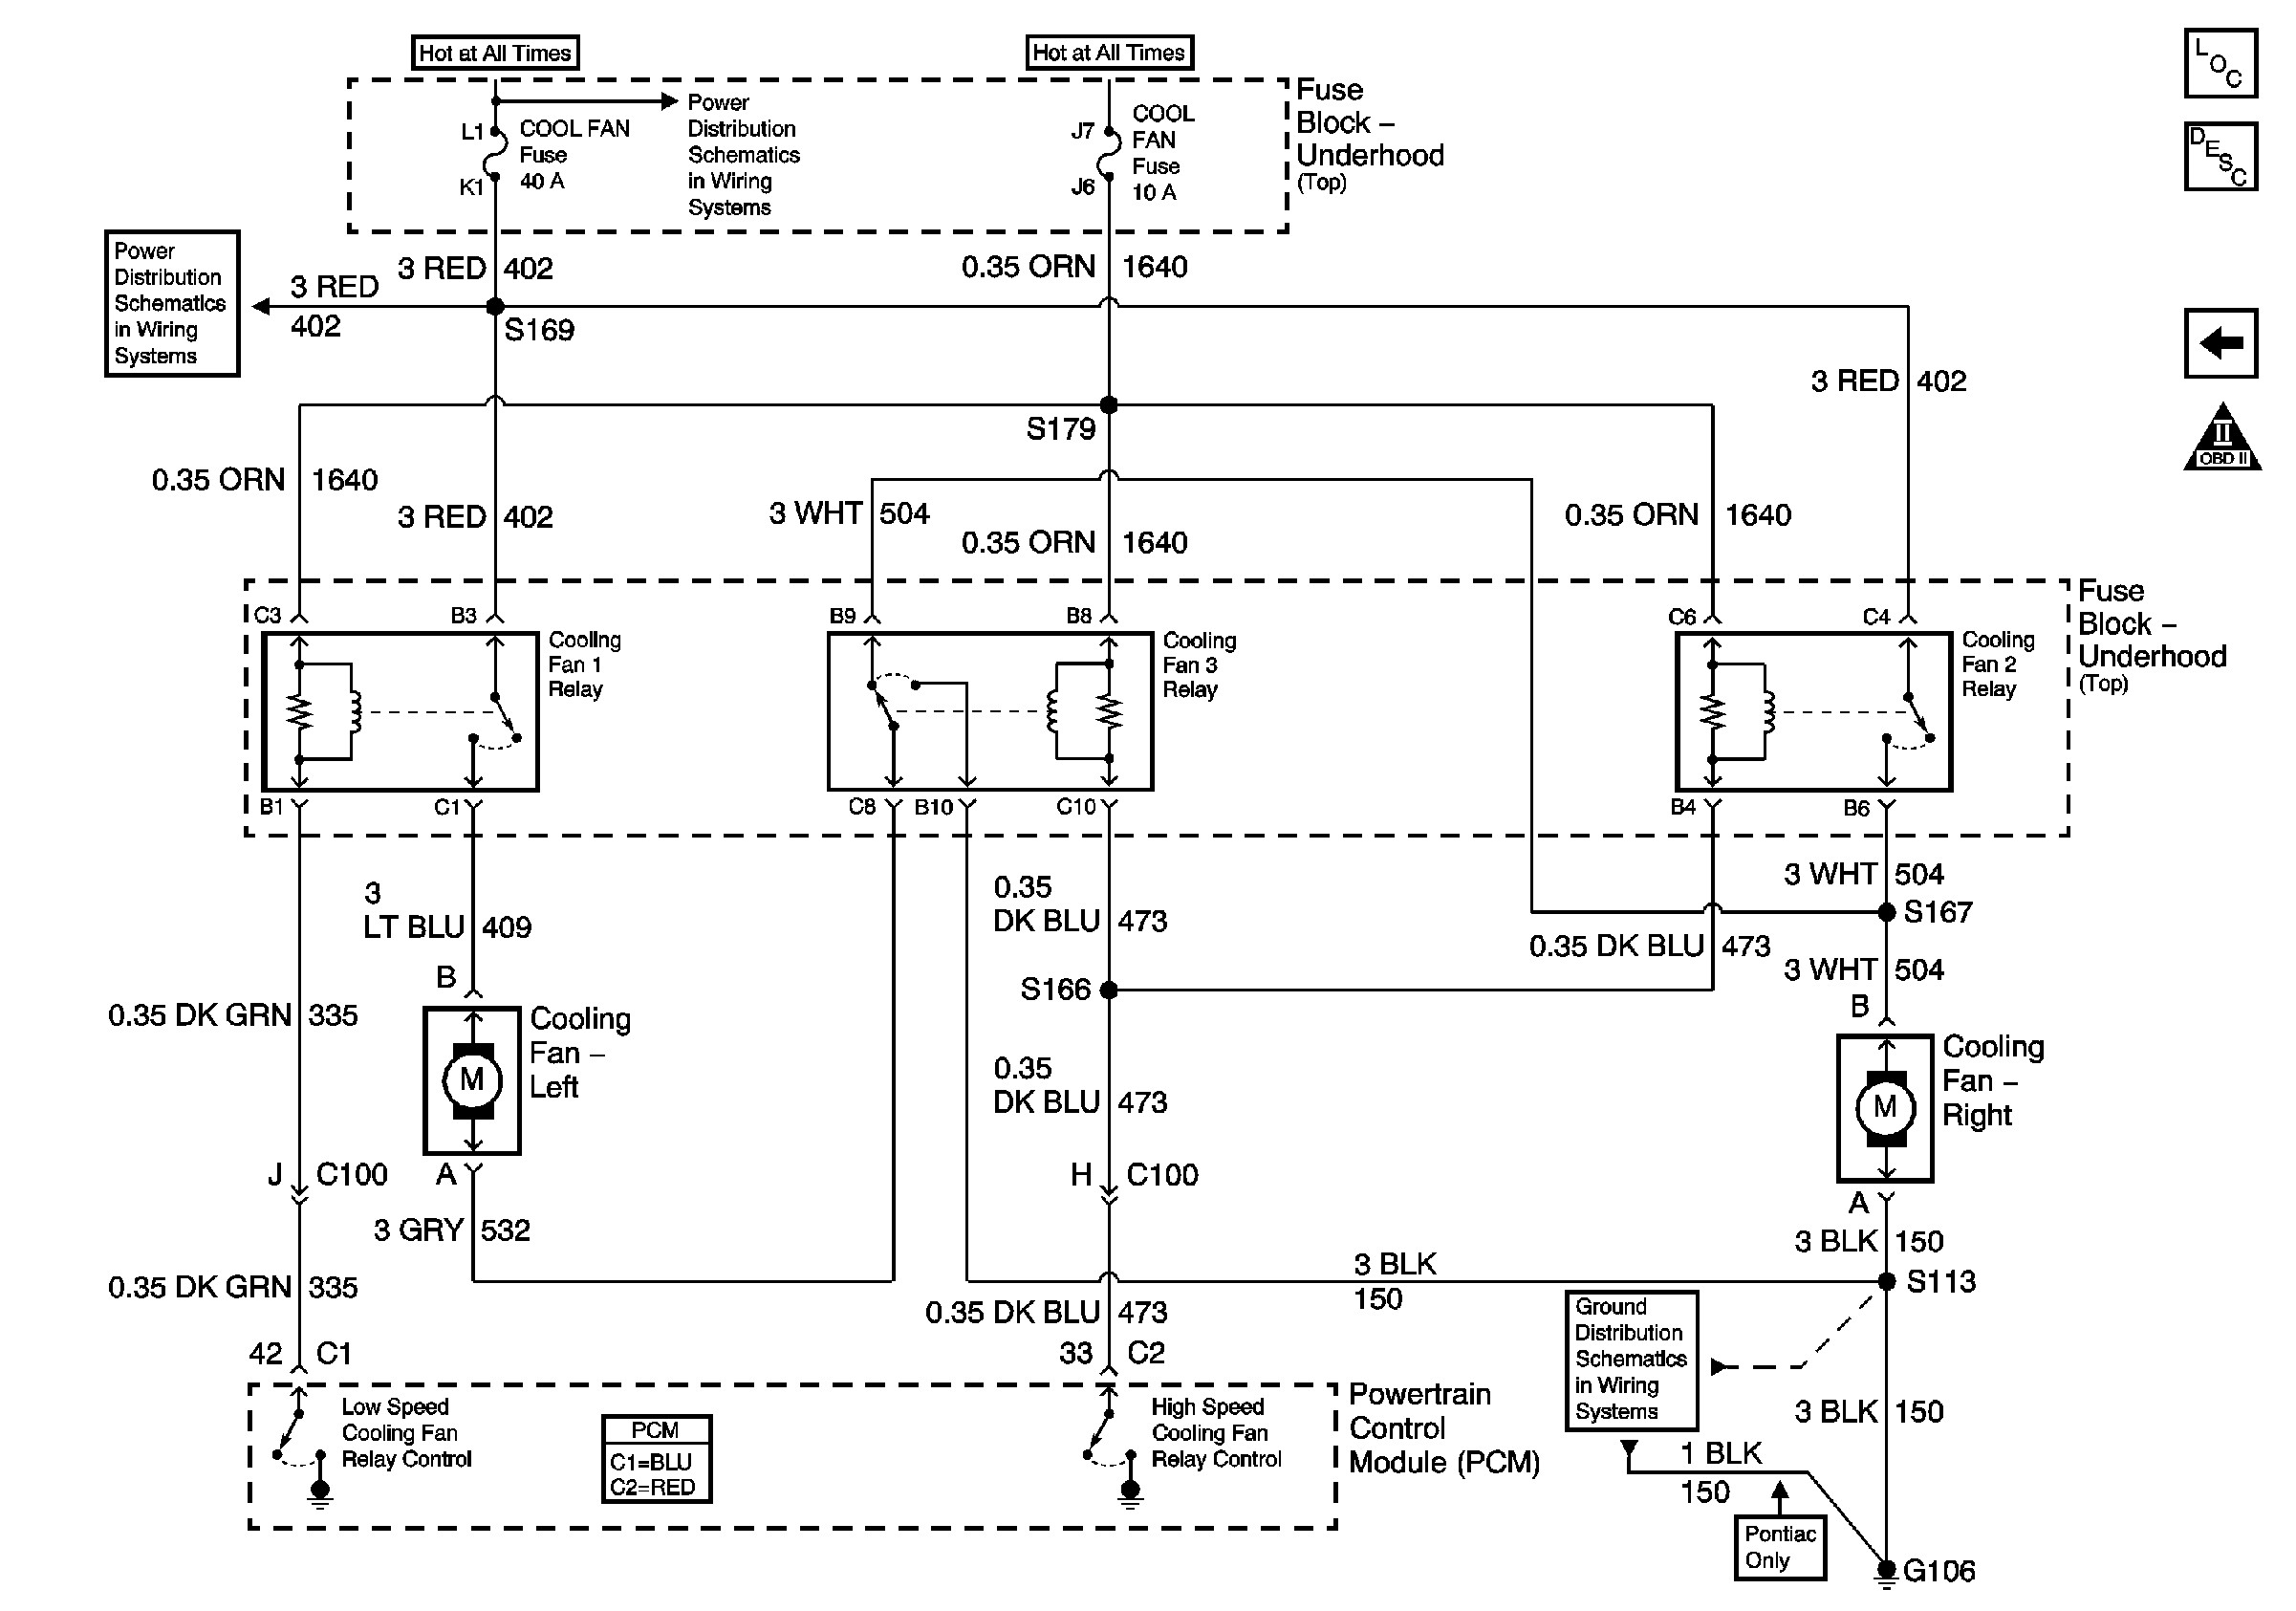 Electric Fan Relay Wiring Schematic Tamahuproject Org Diagram Physical Connections Drawing Free Diagrams Wires Electrical Circuit